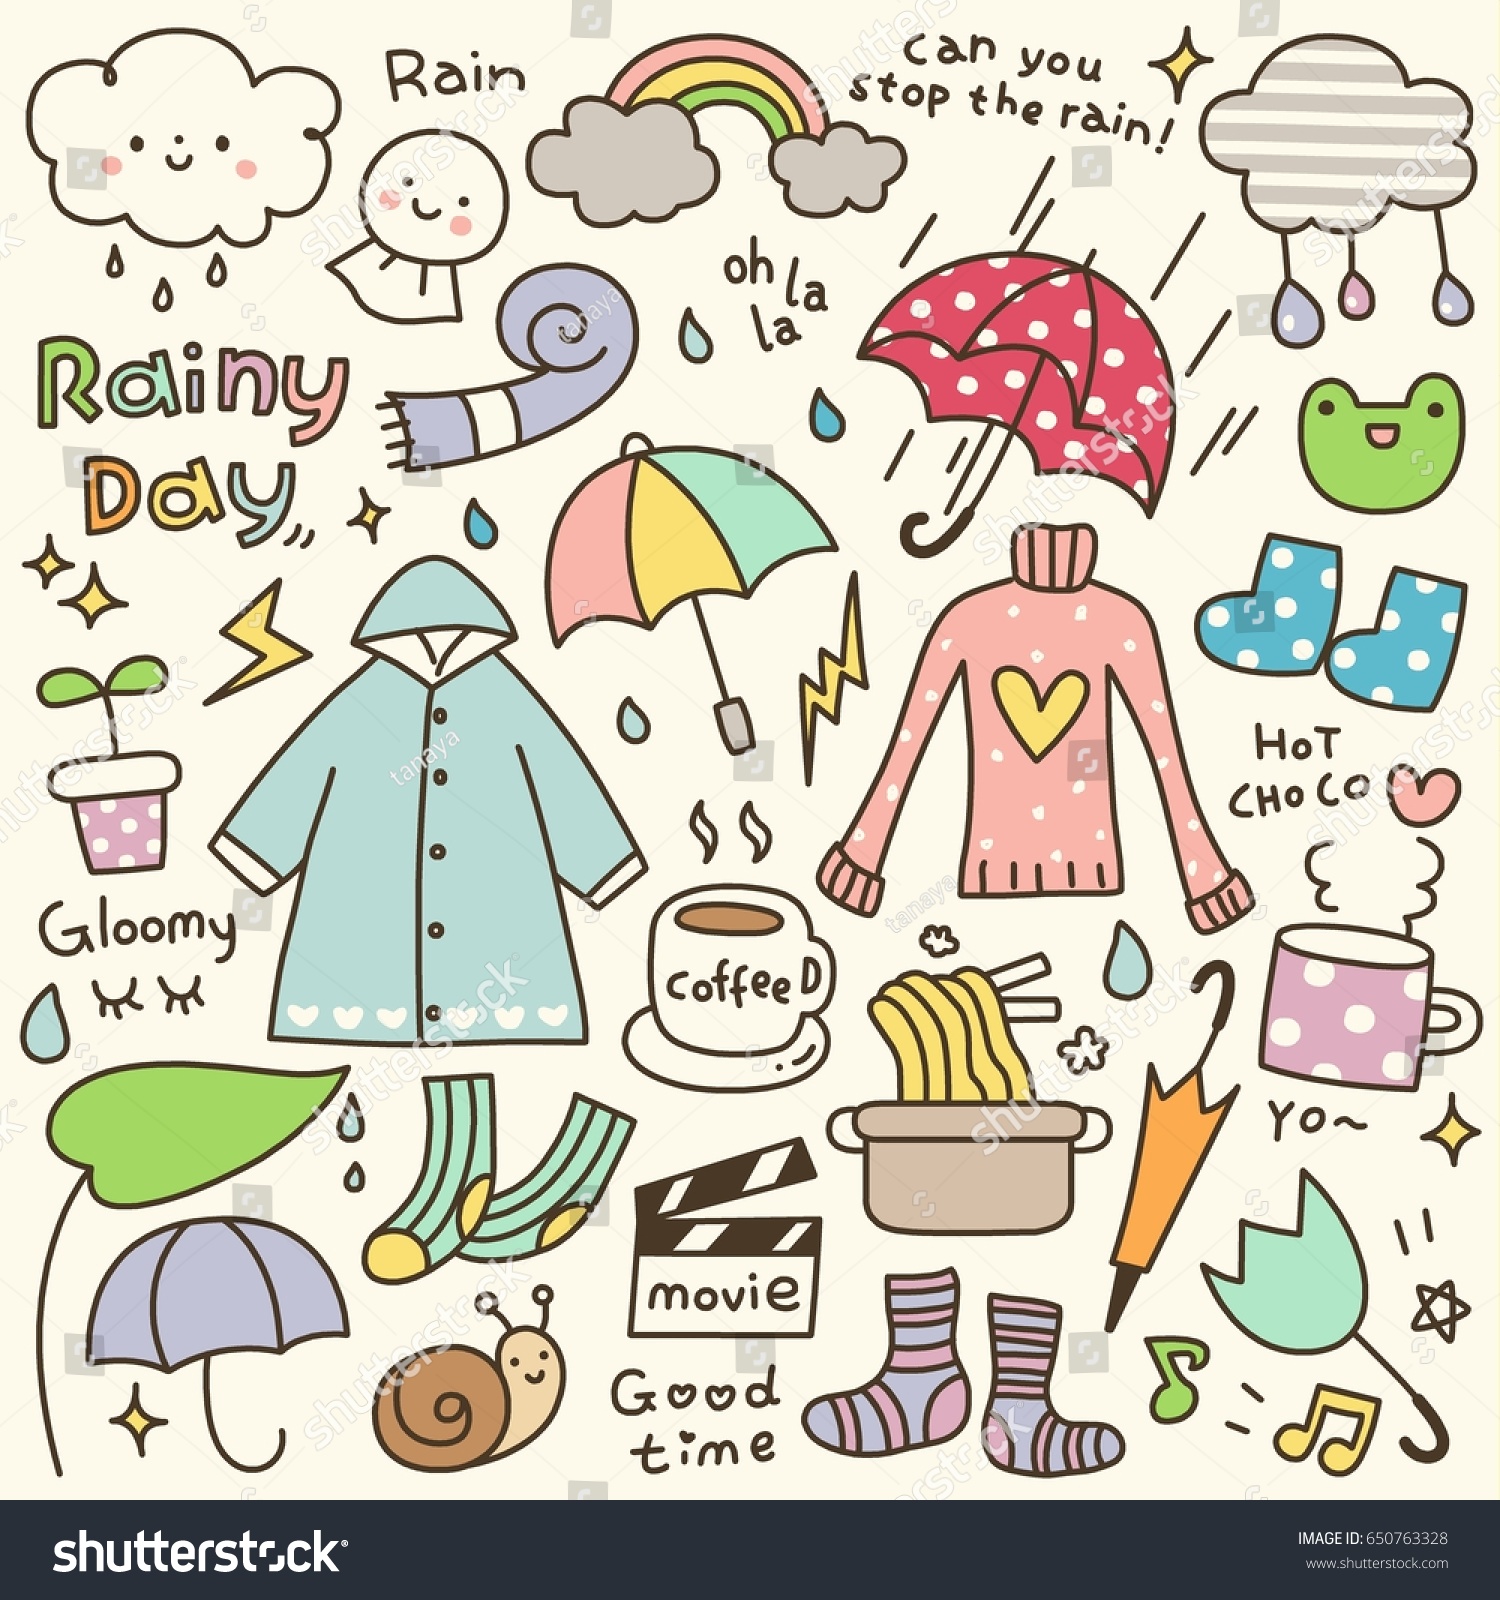 Set Cute Rainy Day Doodle Stock Vector Royalty Free 650763328